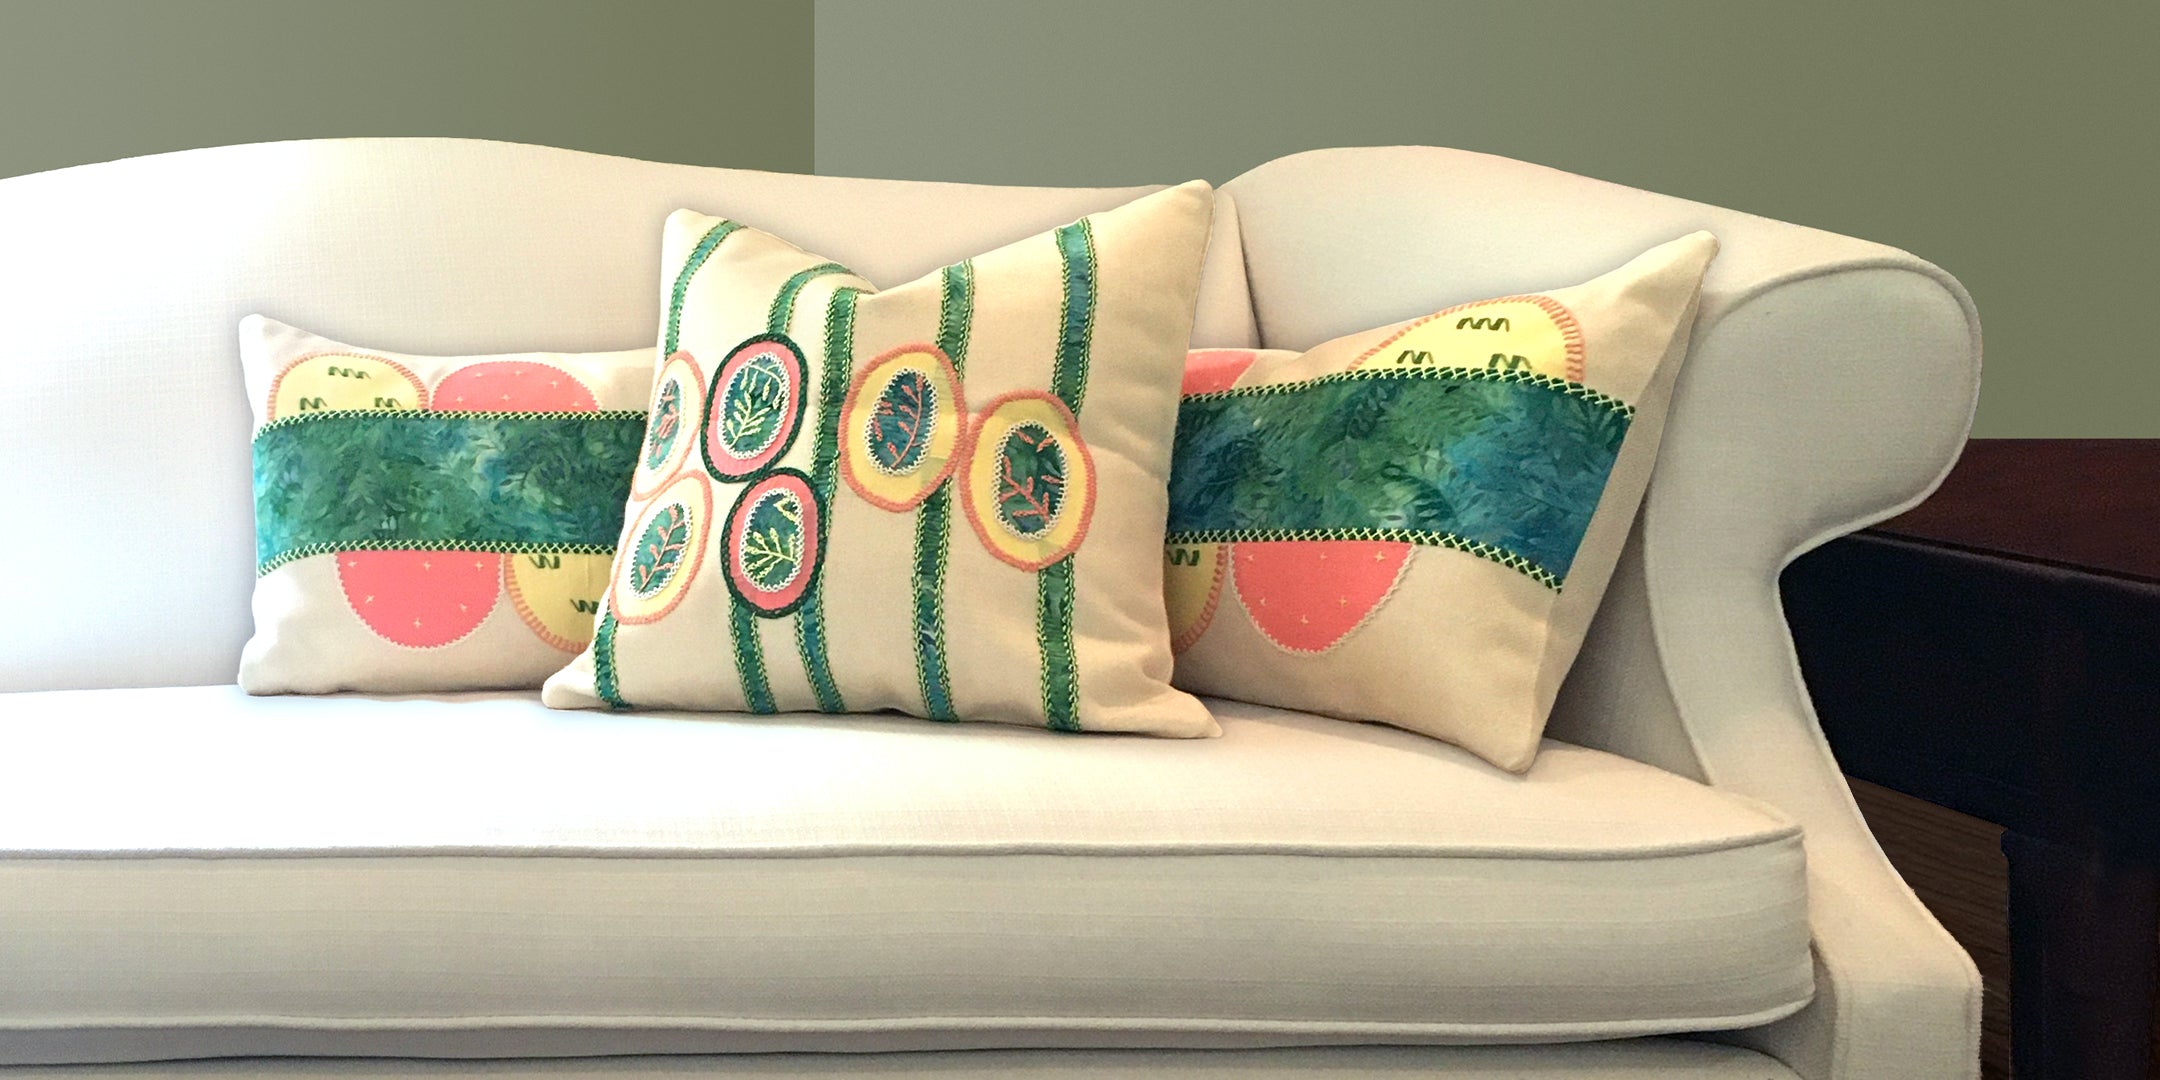 Beautiful hand-embroidered pillows for a good cause!